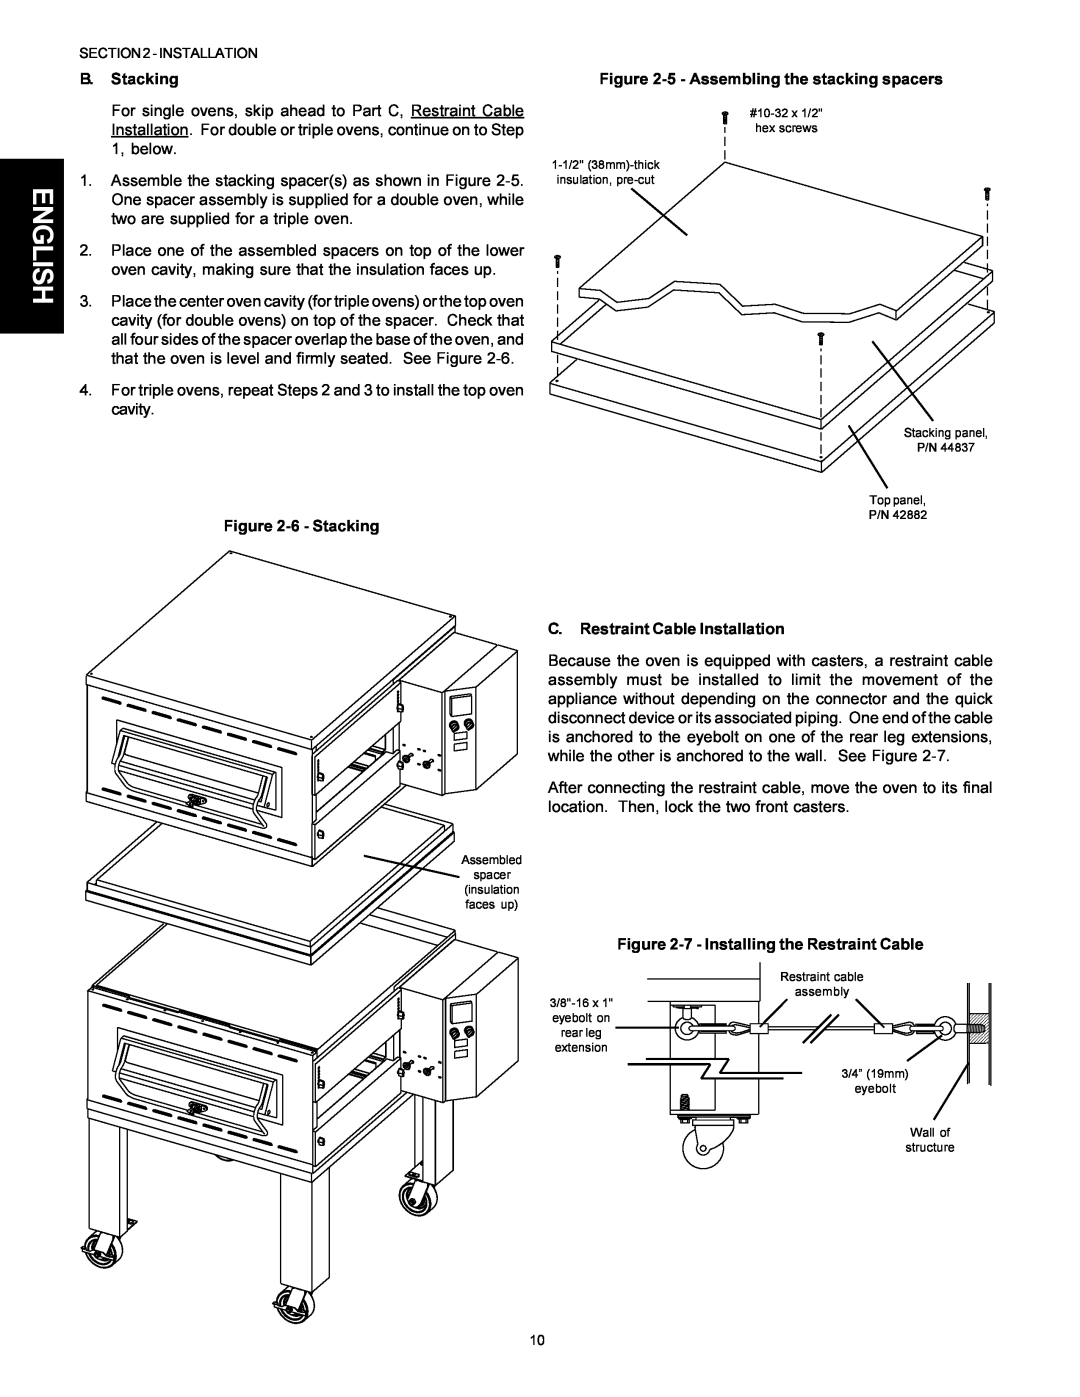 Middleby Marshall Model PS536 installation manual B. Stacking, 6 - Stacking, 5 - Assembling the stacking spacers 